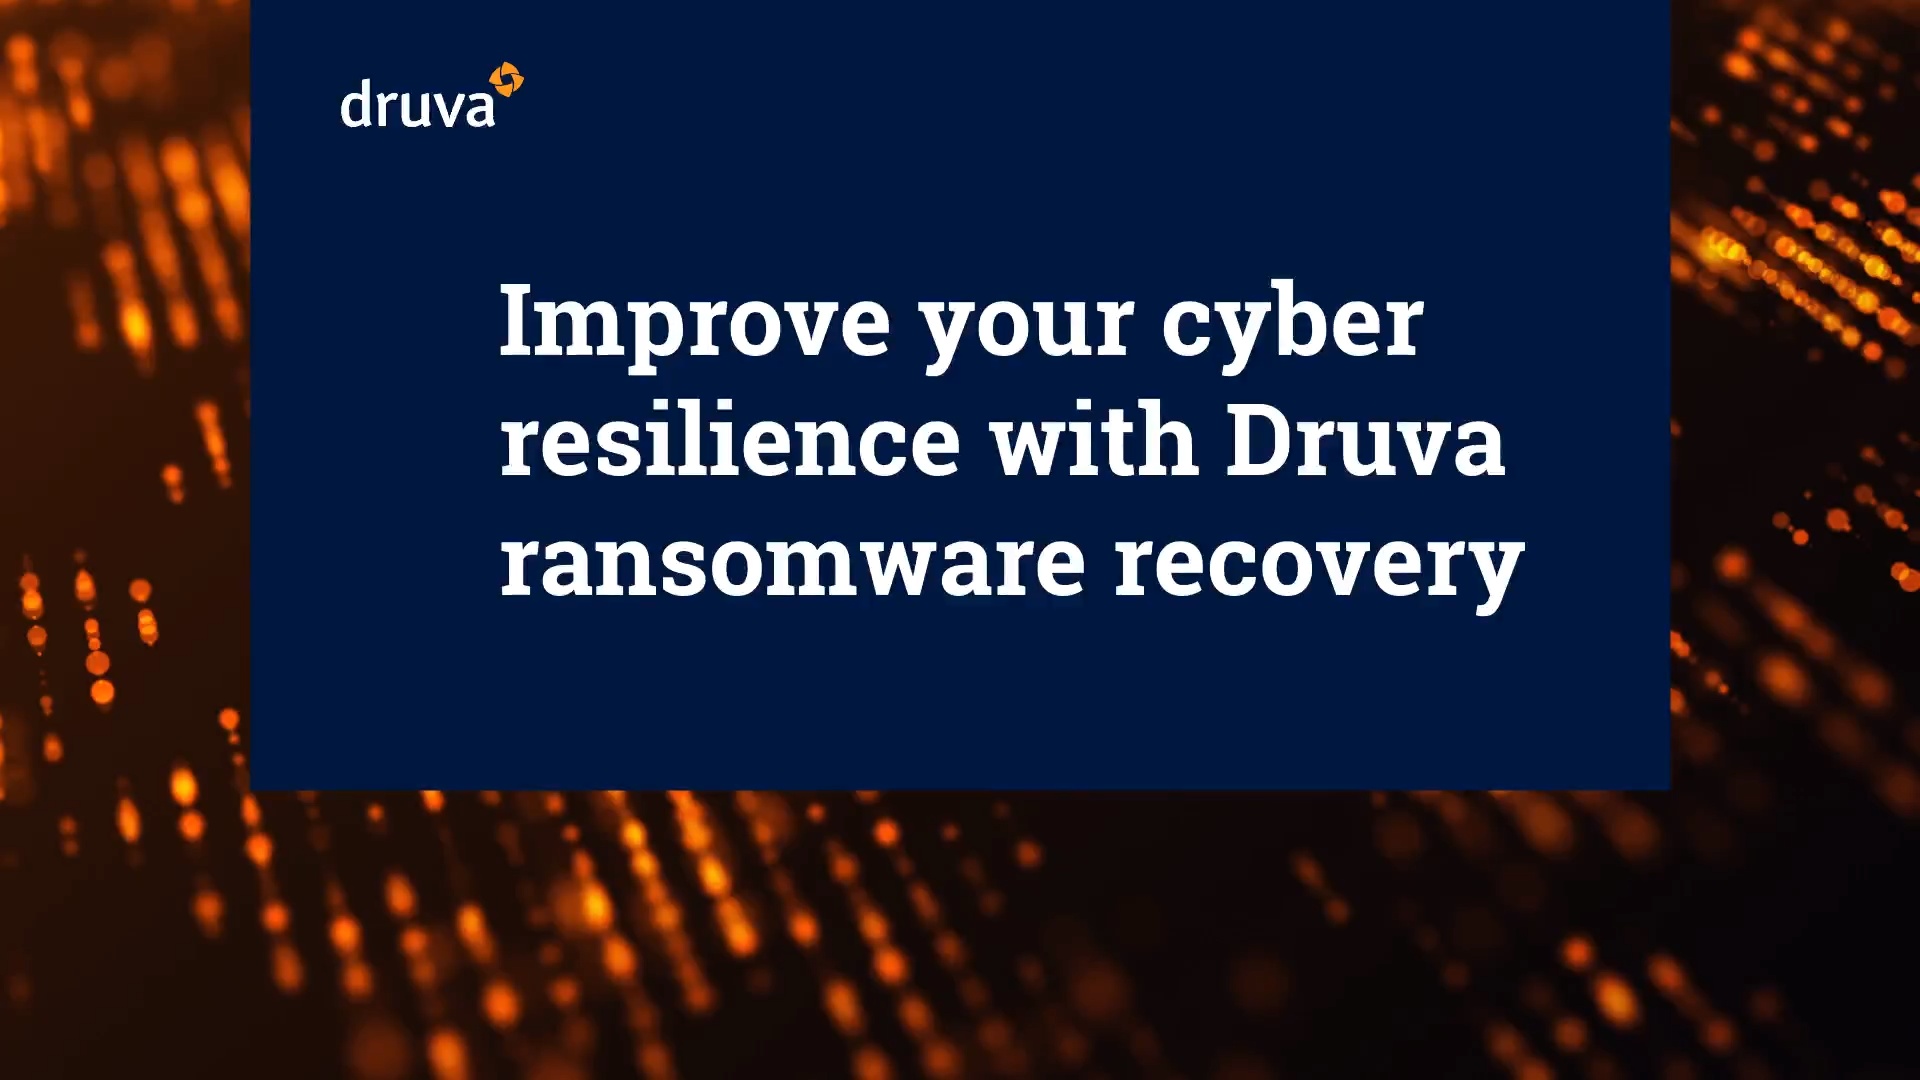 Cyber resilience with Druva ransomware recovery